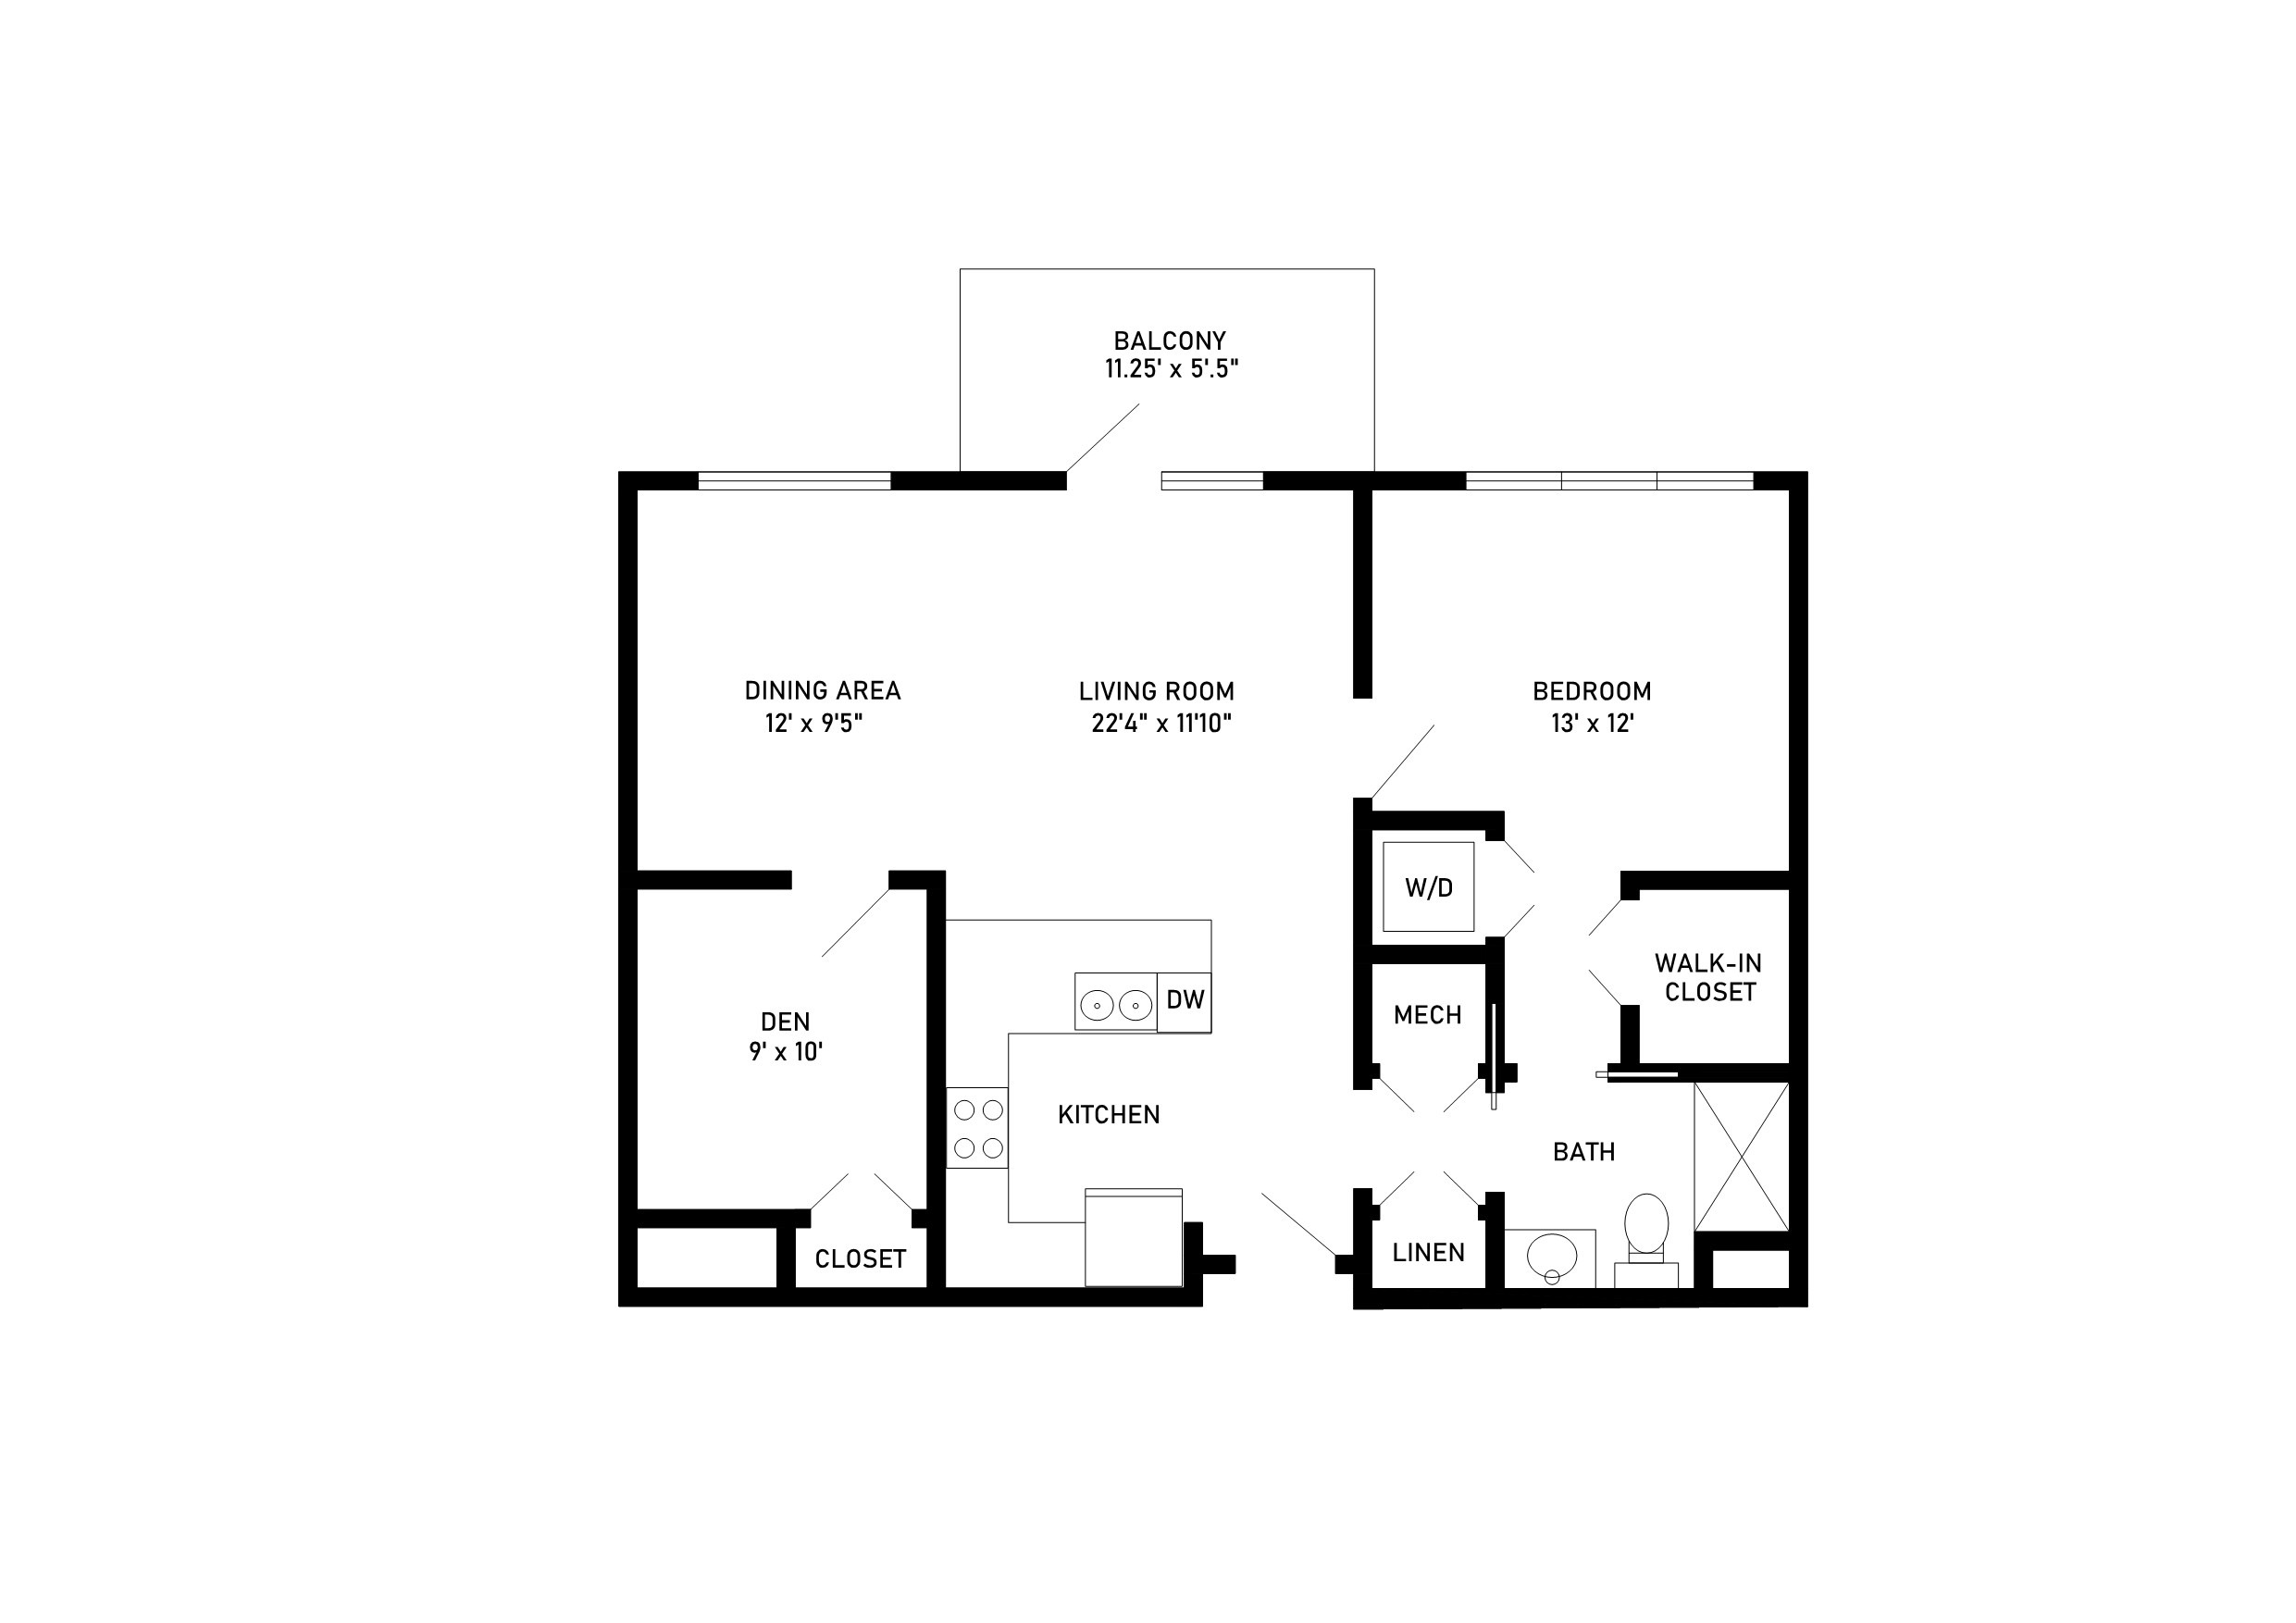 Thumbnail image town center 1 bed apartment 901 square feet